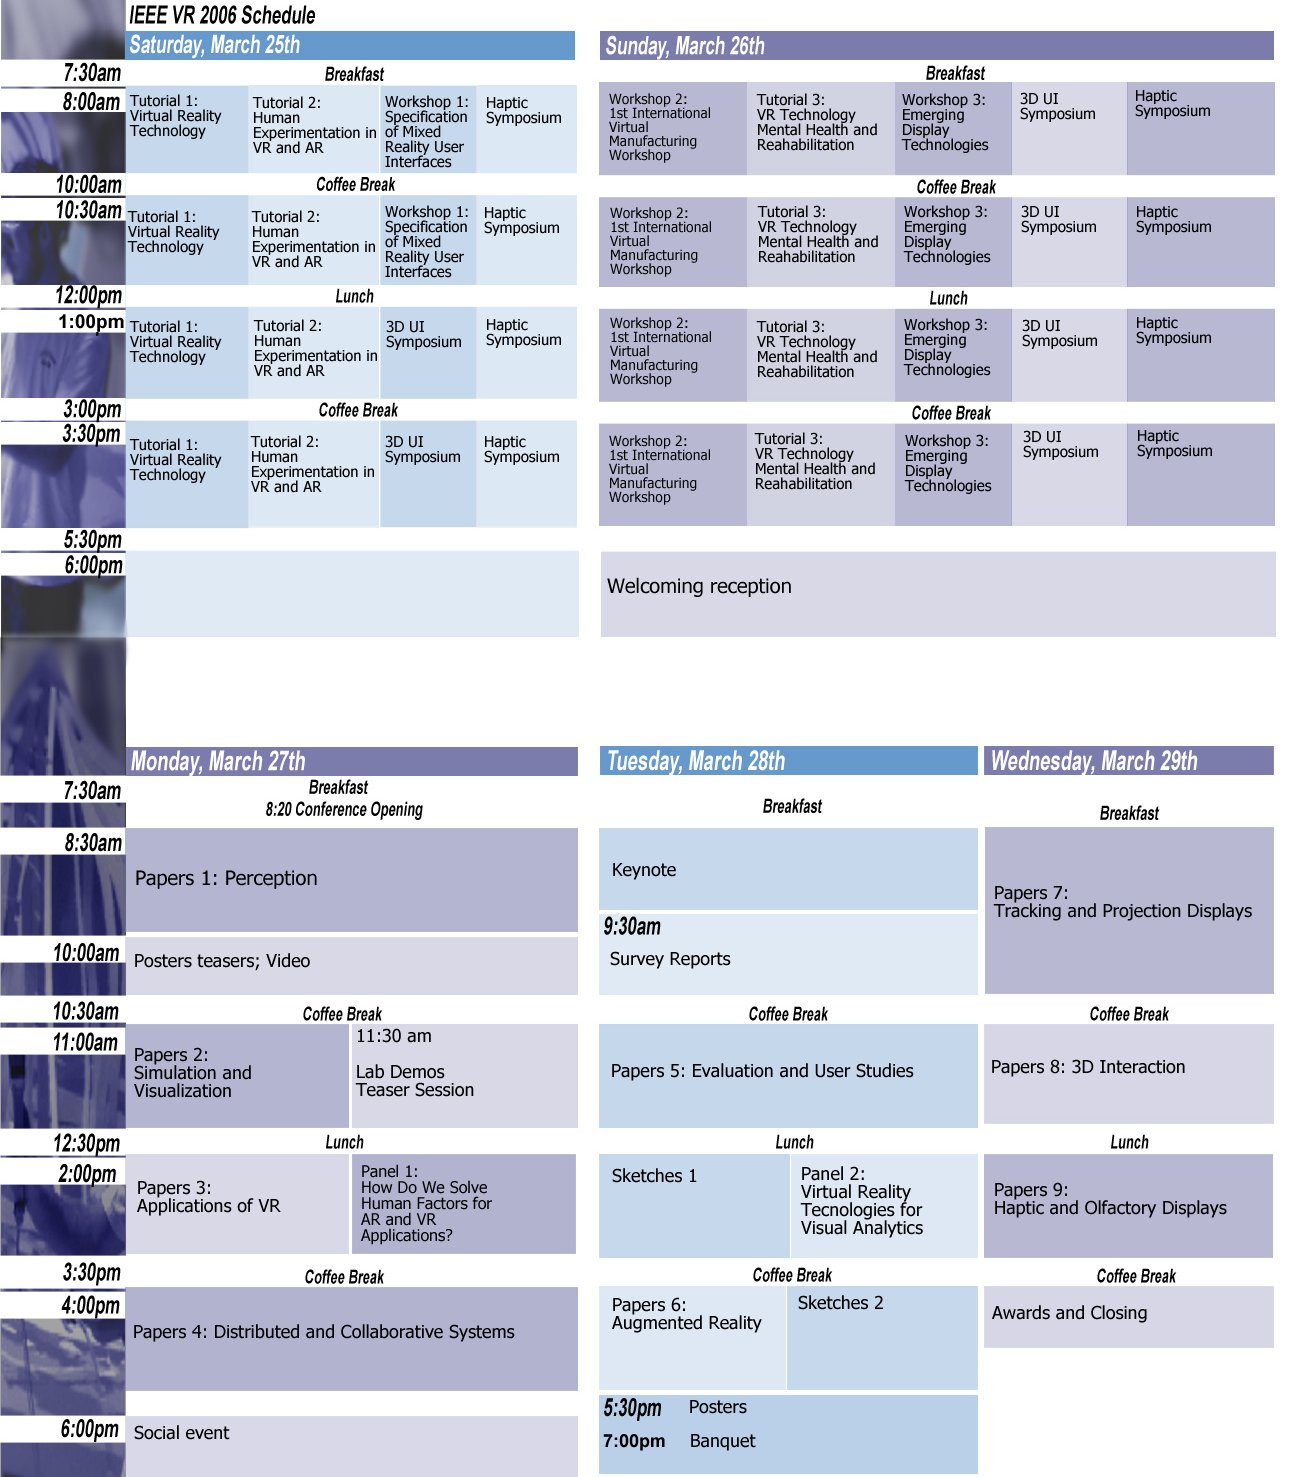 IEEE VR Conference Schedule